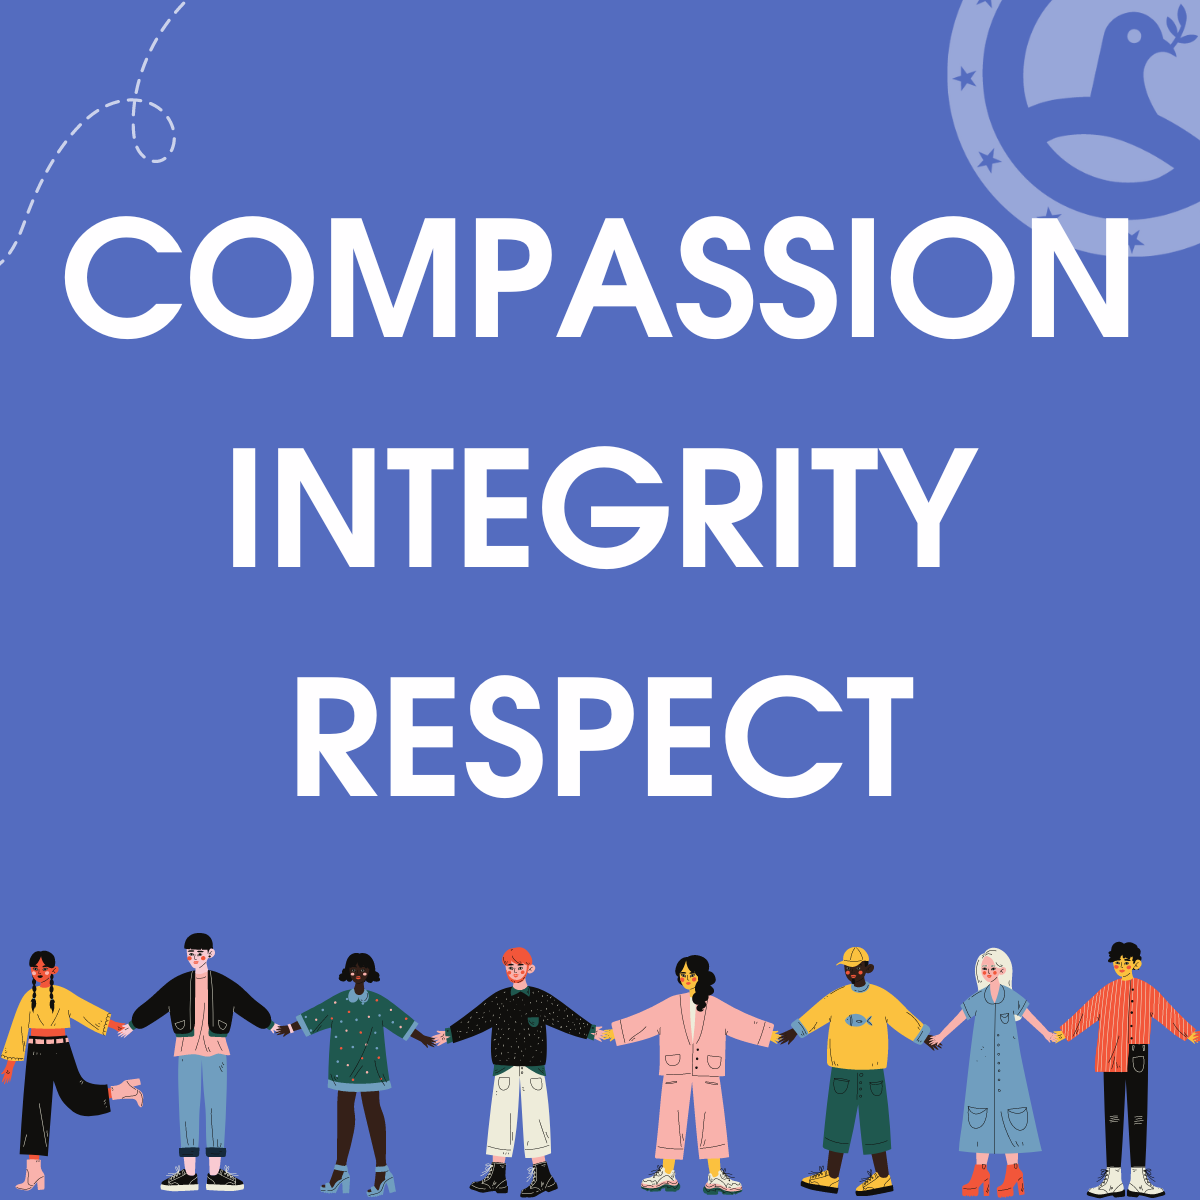 Compassion integrity respect